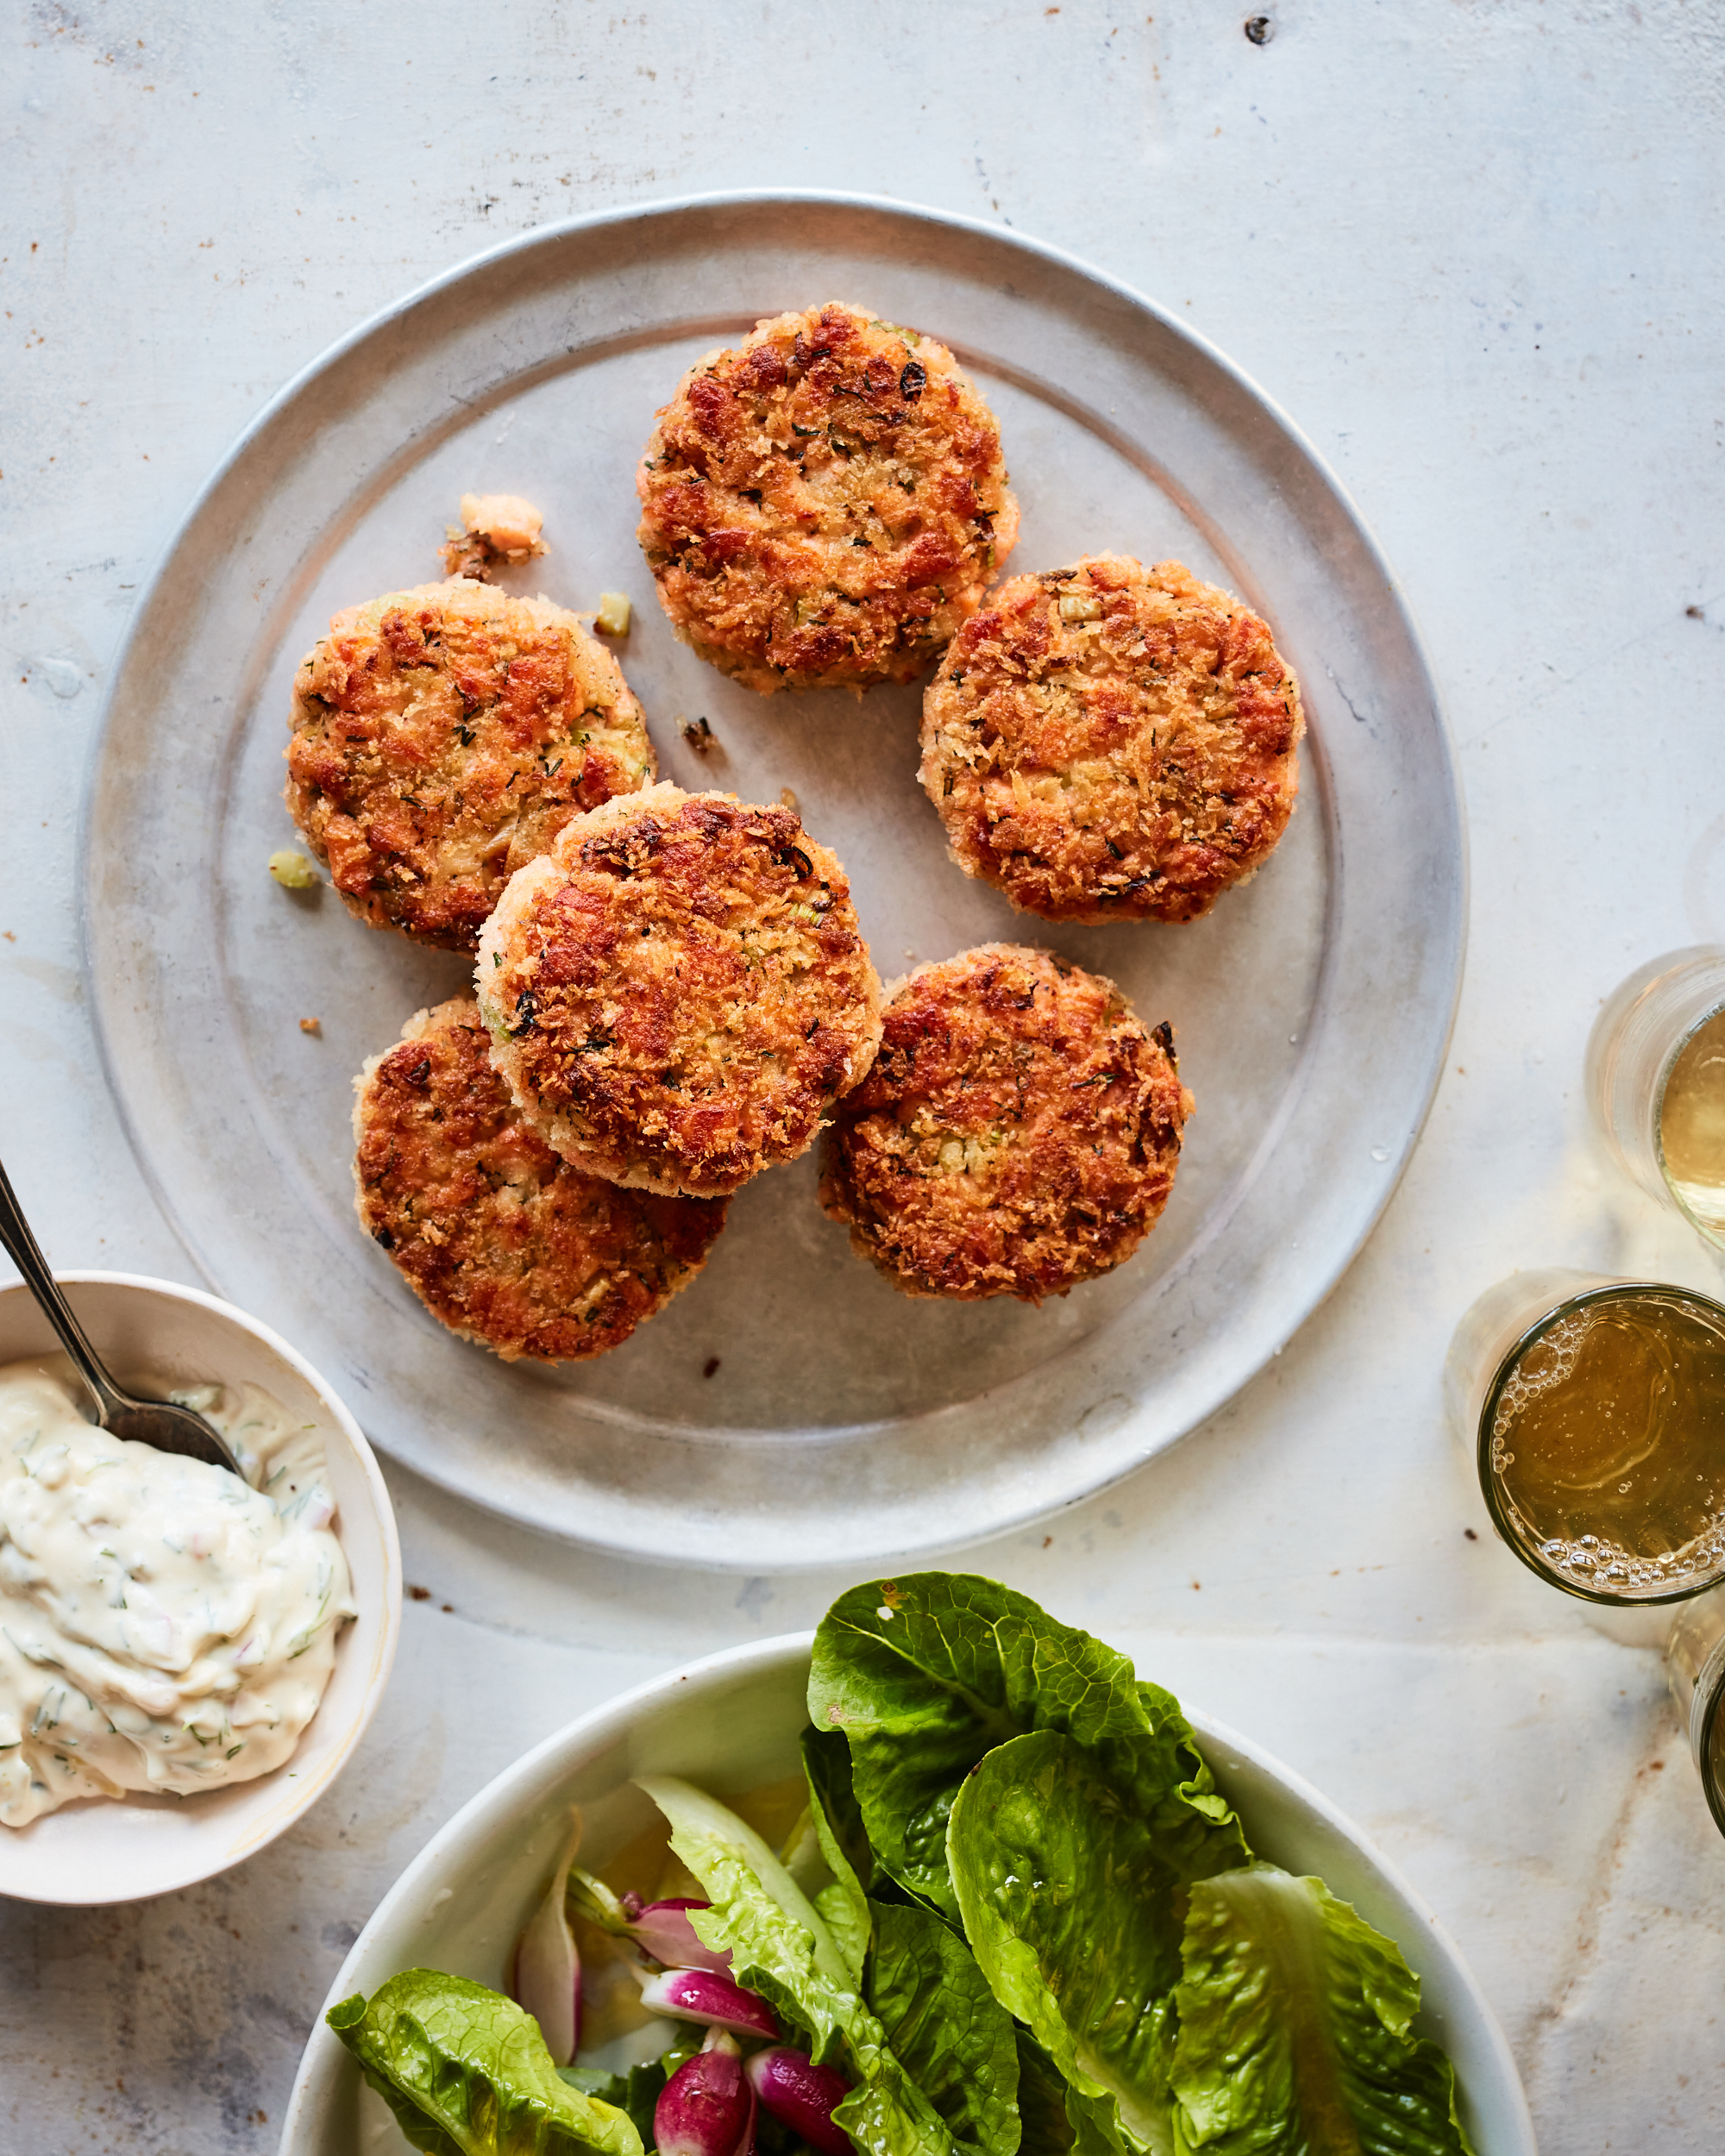 Incredible Baked Fish Cakes without Breadcrumbs